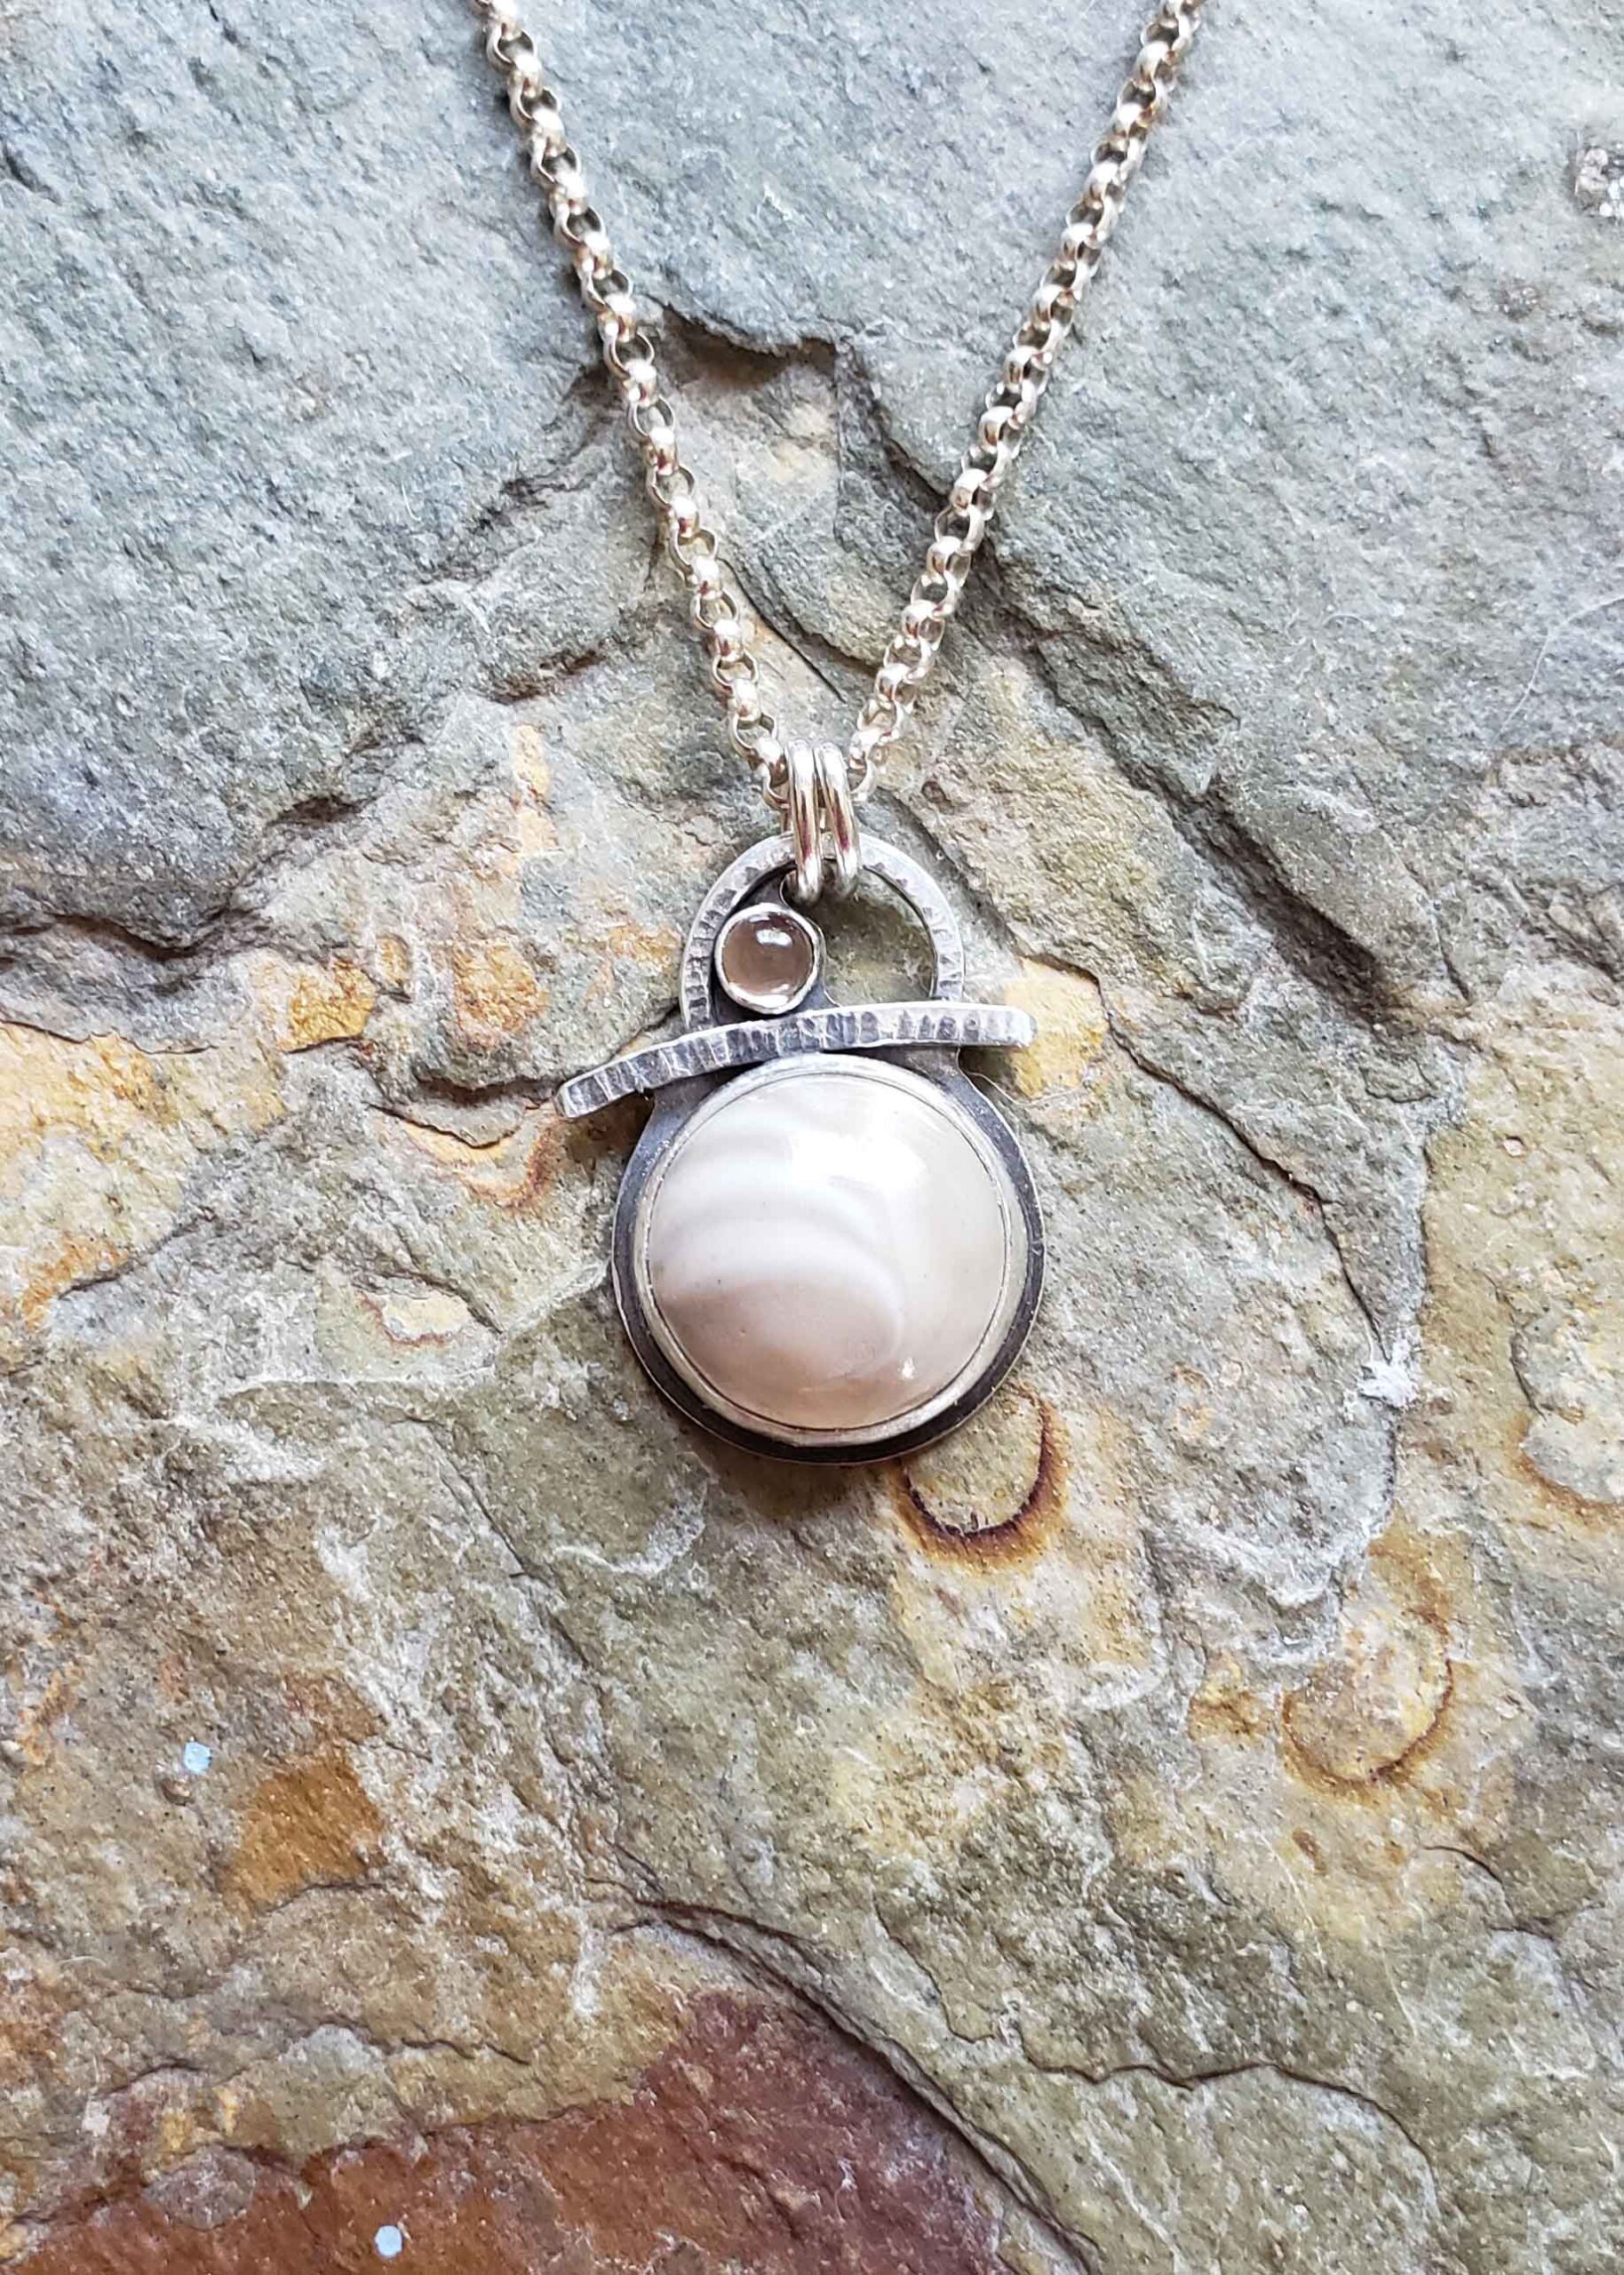 Petite silver pendant in creams and browns by Dona Miller.